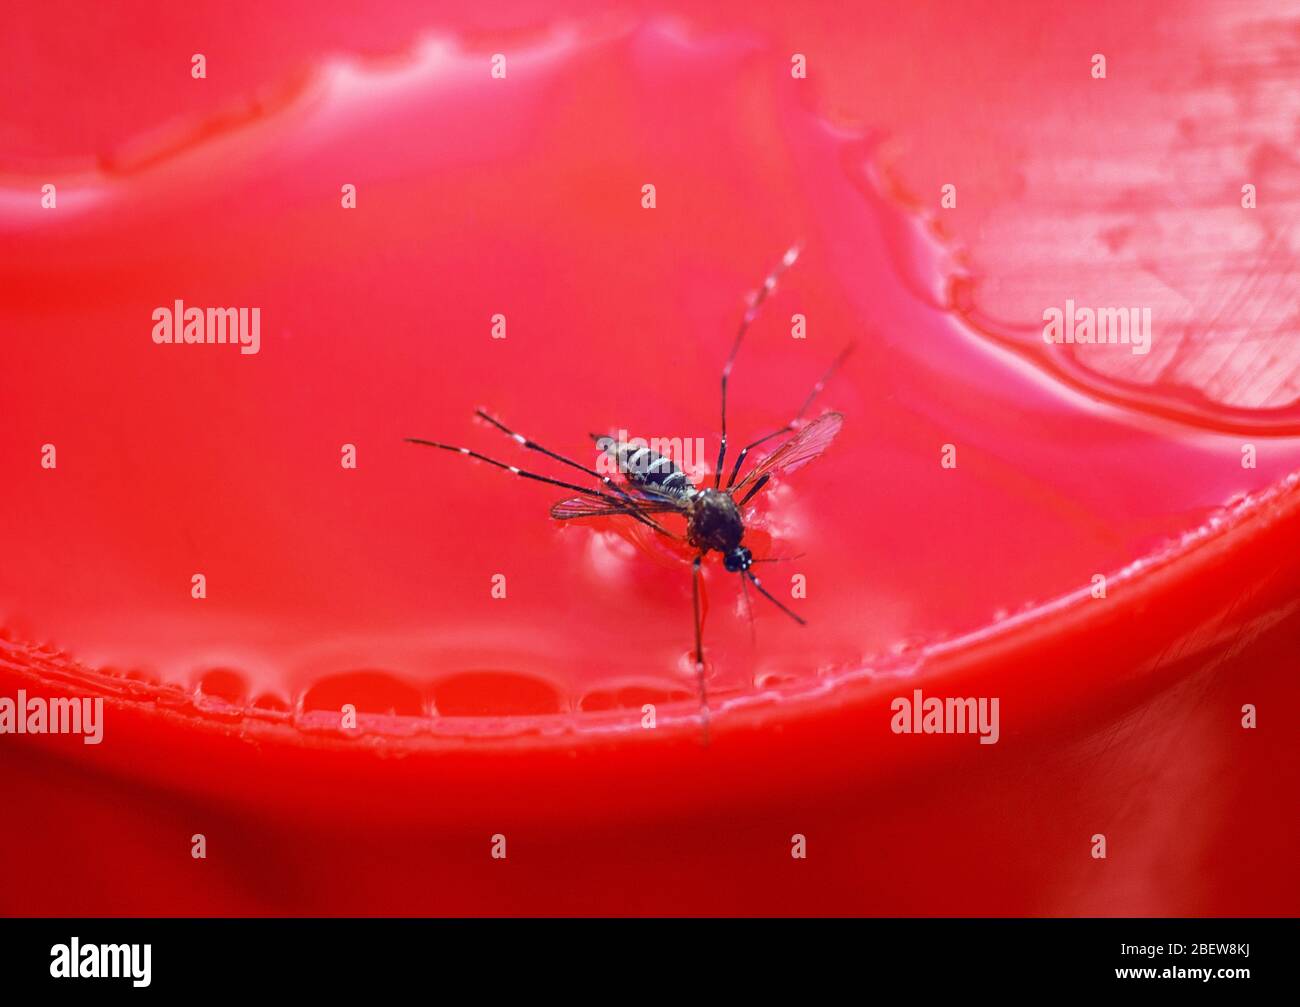 Dead mosquito in a drop of water with a red background Stock Photo